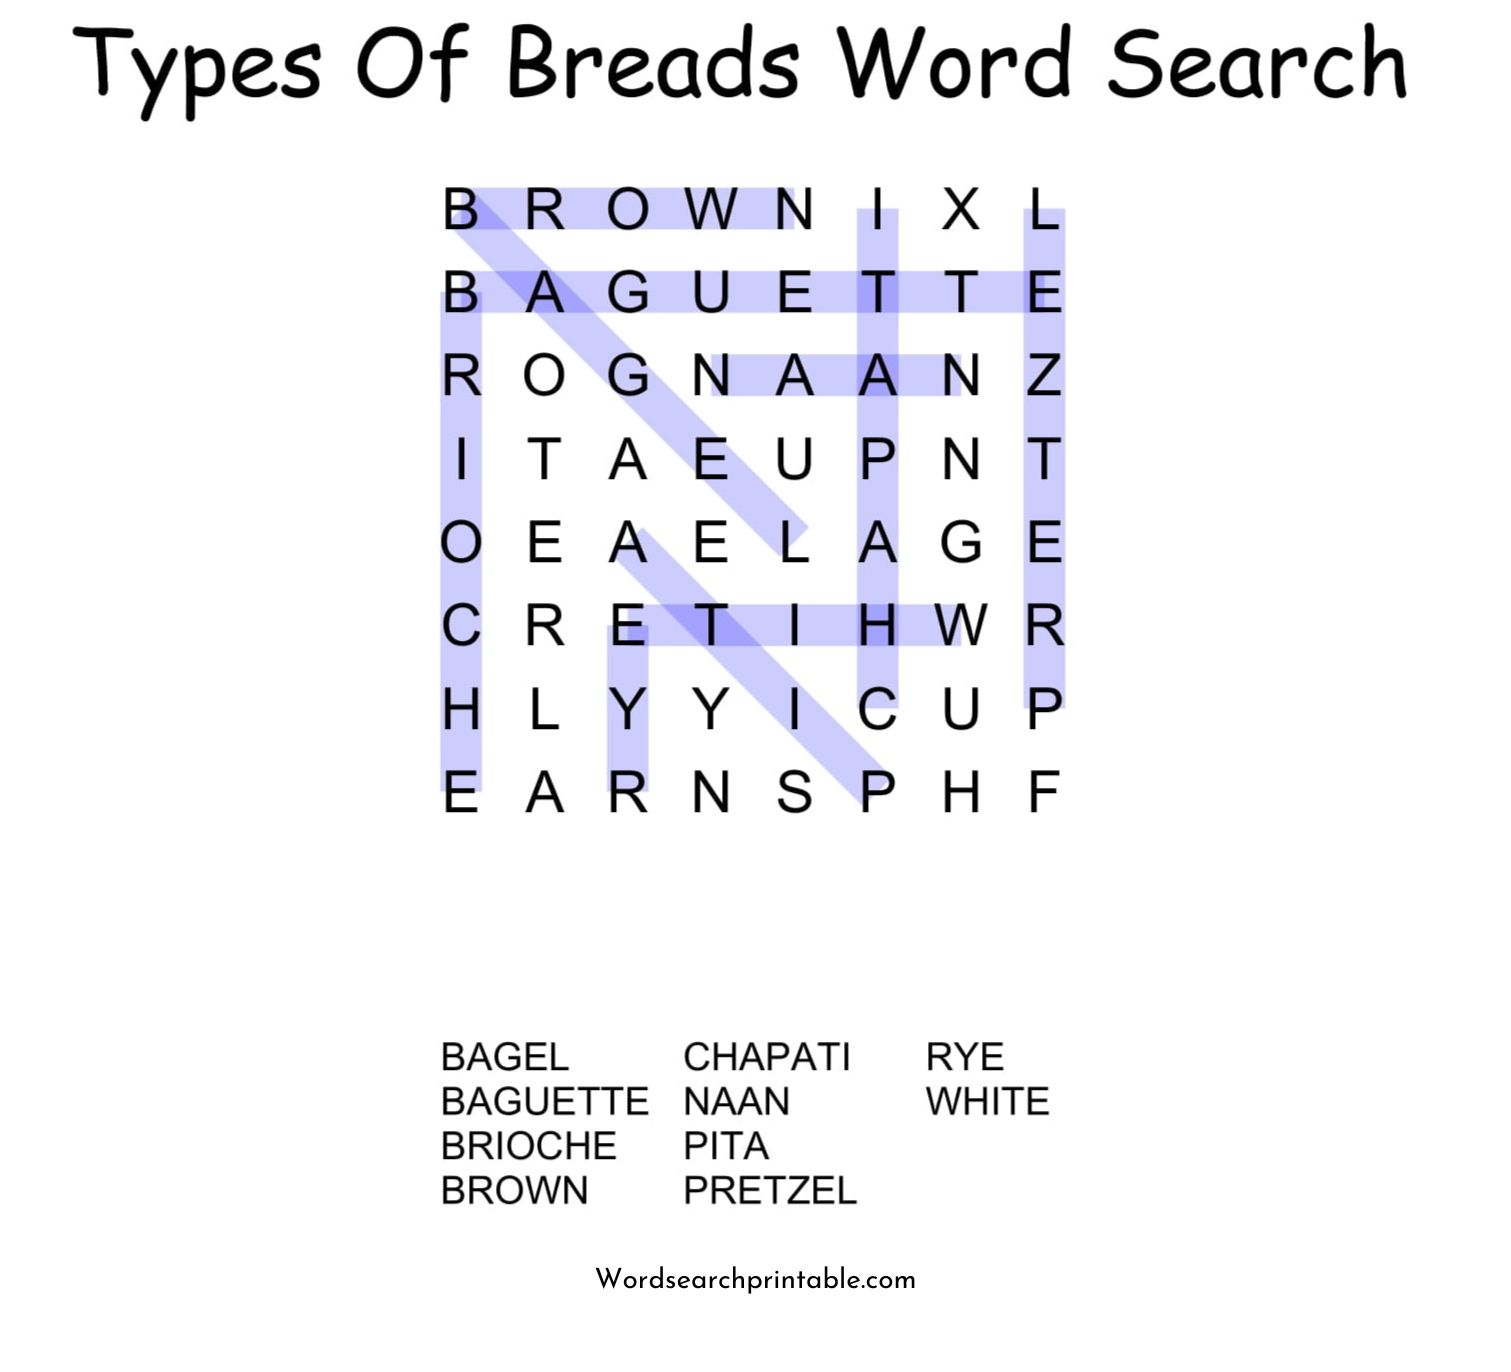 types of breads word search puzzle solution